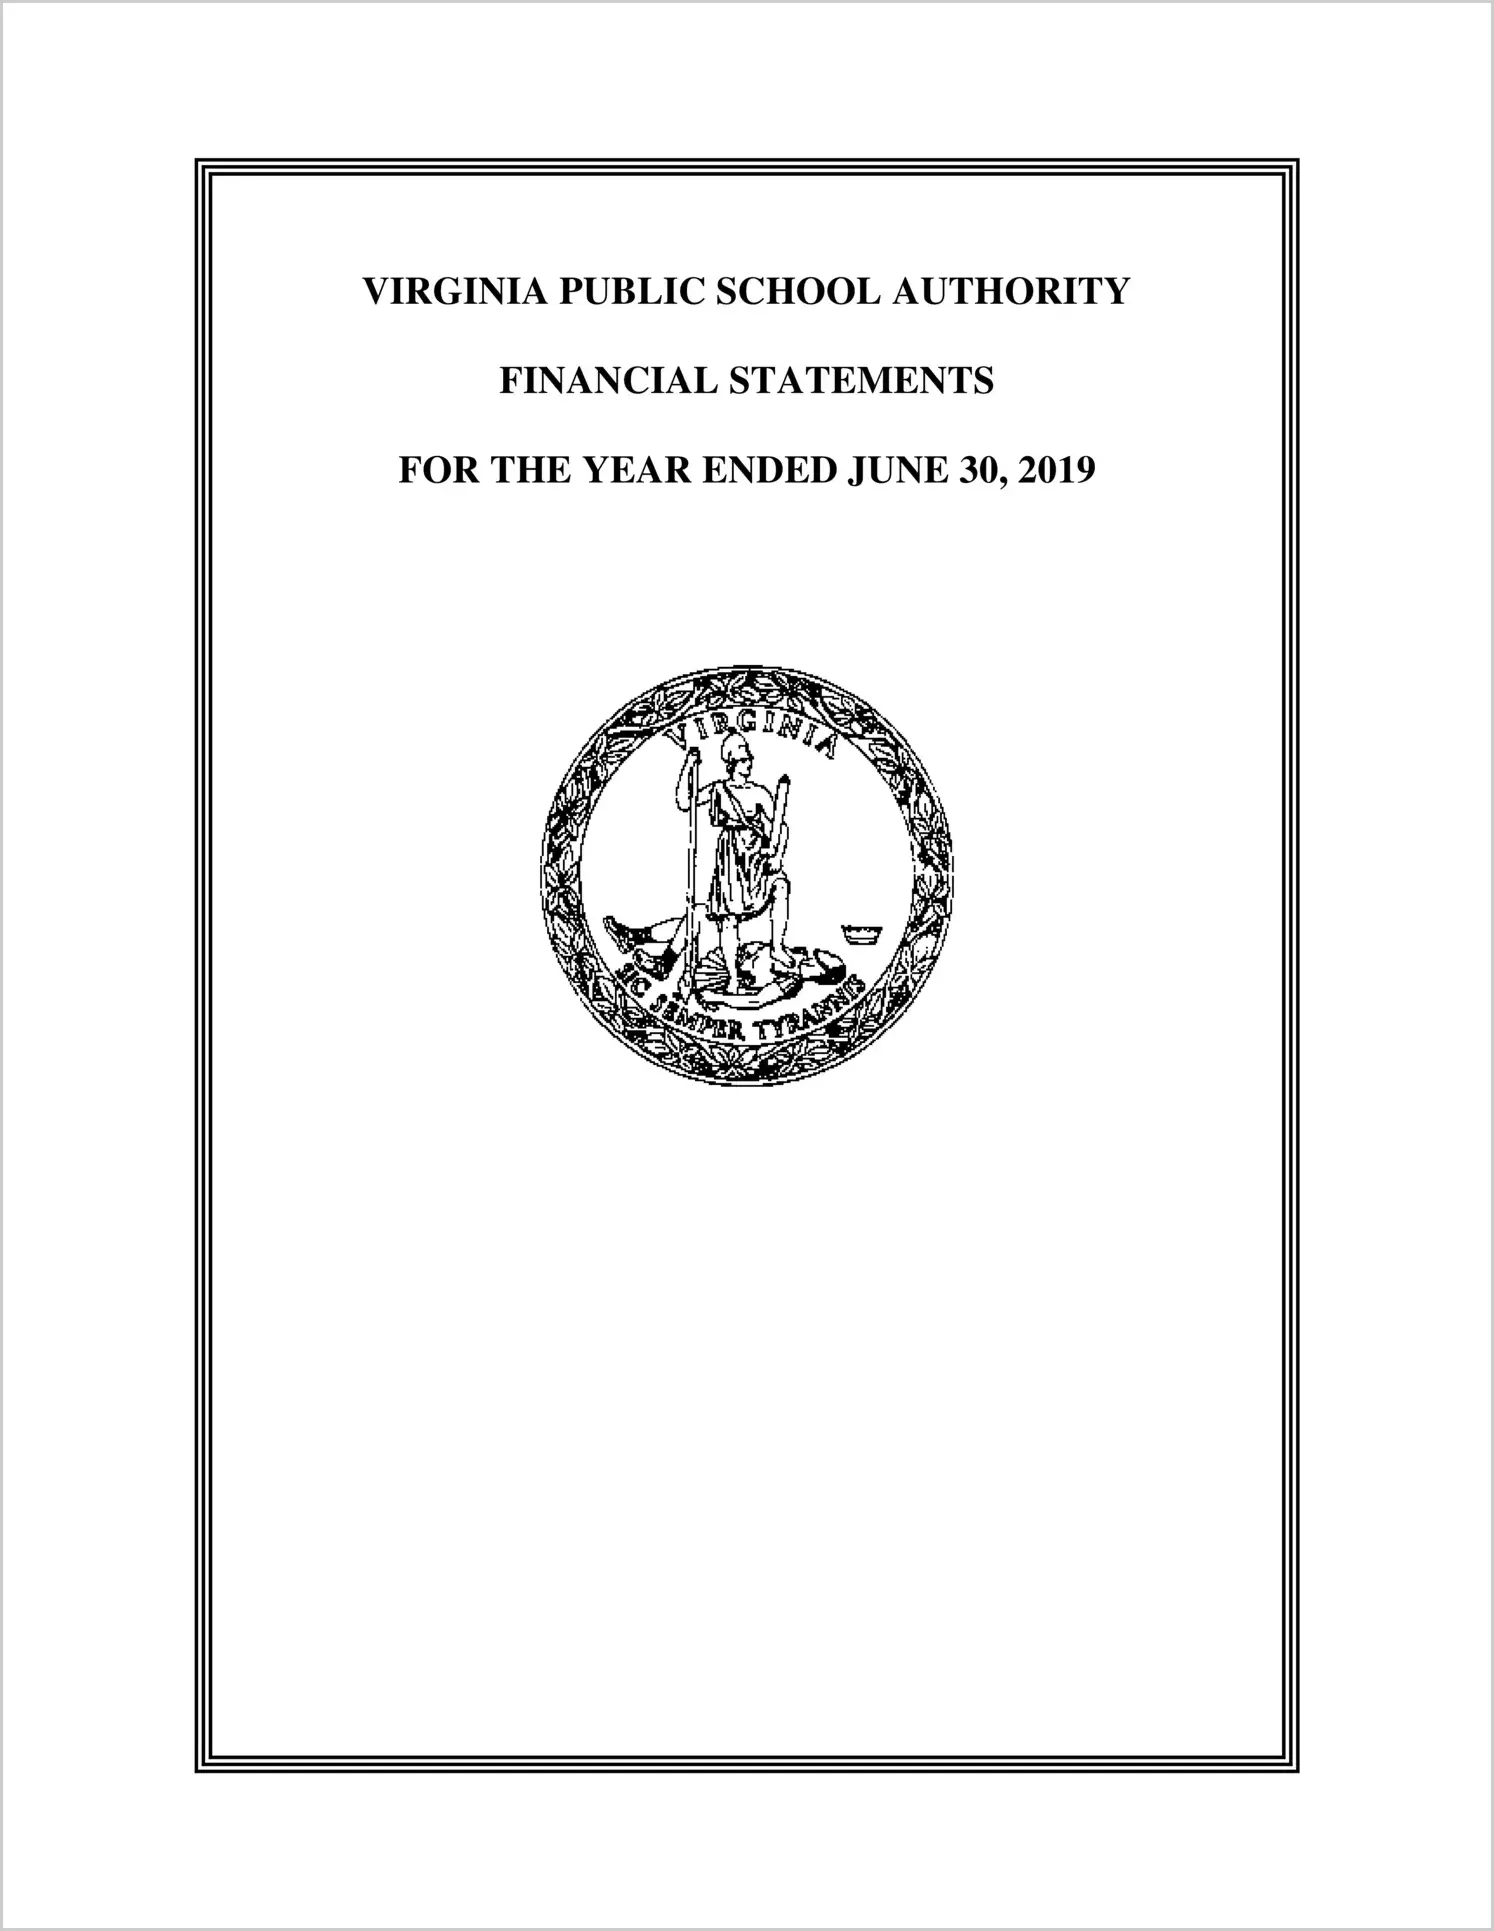 Virginia Public School Authority Financial Statements for the year ended June 30, 2019